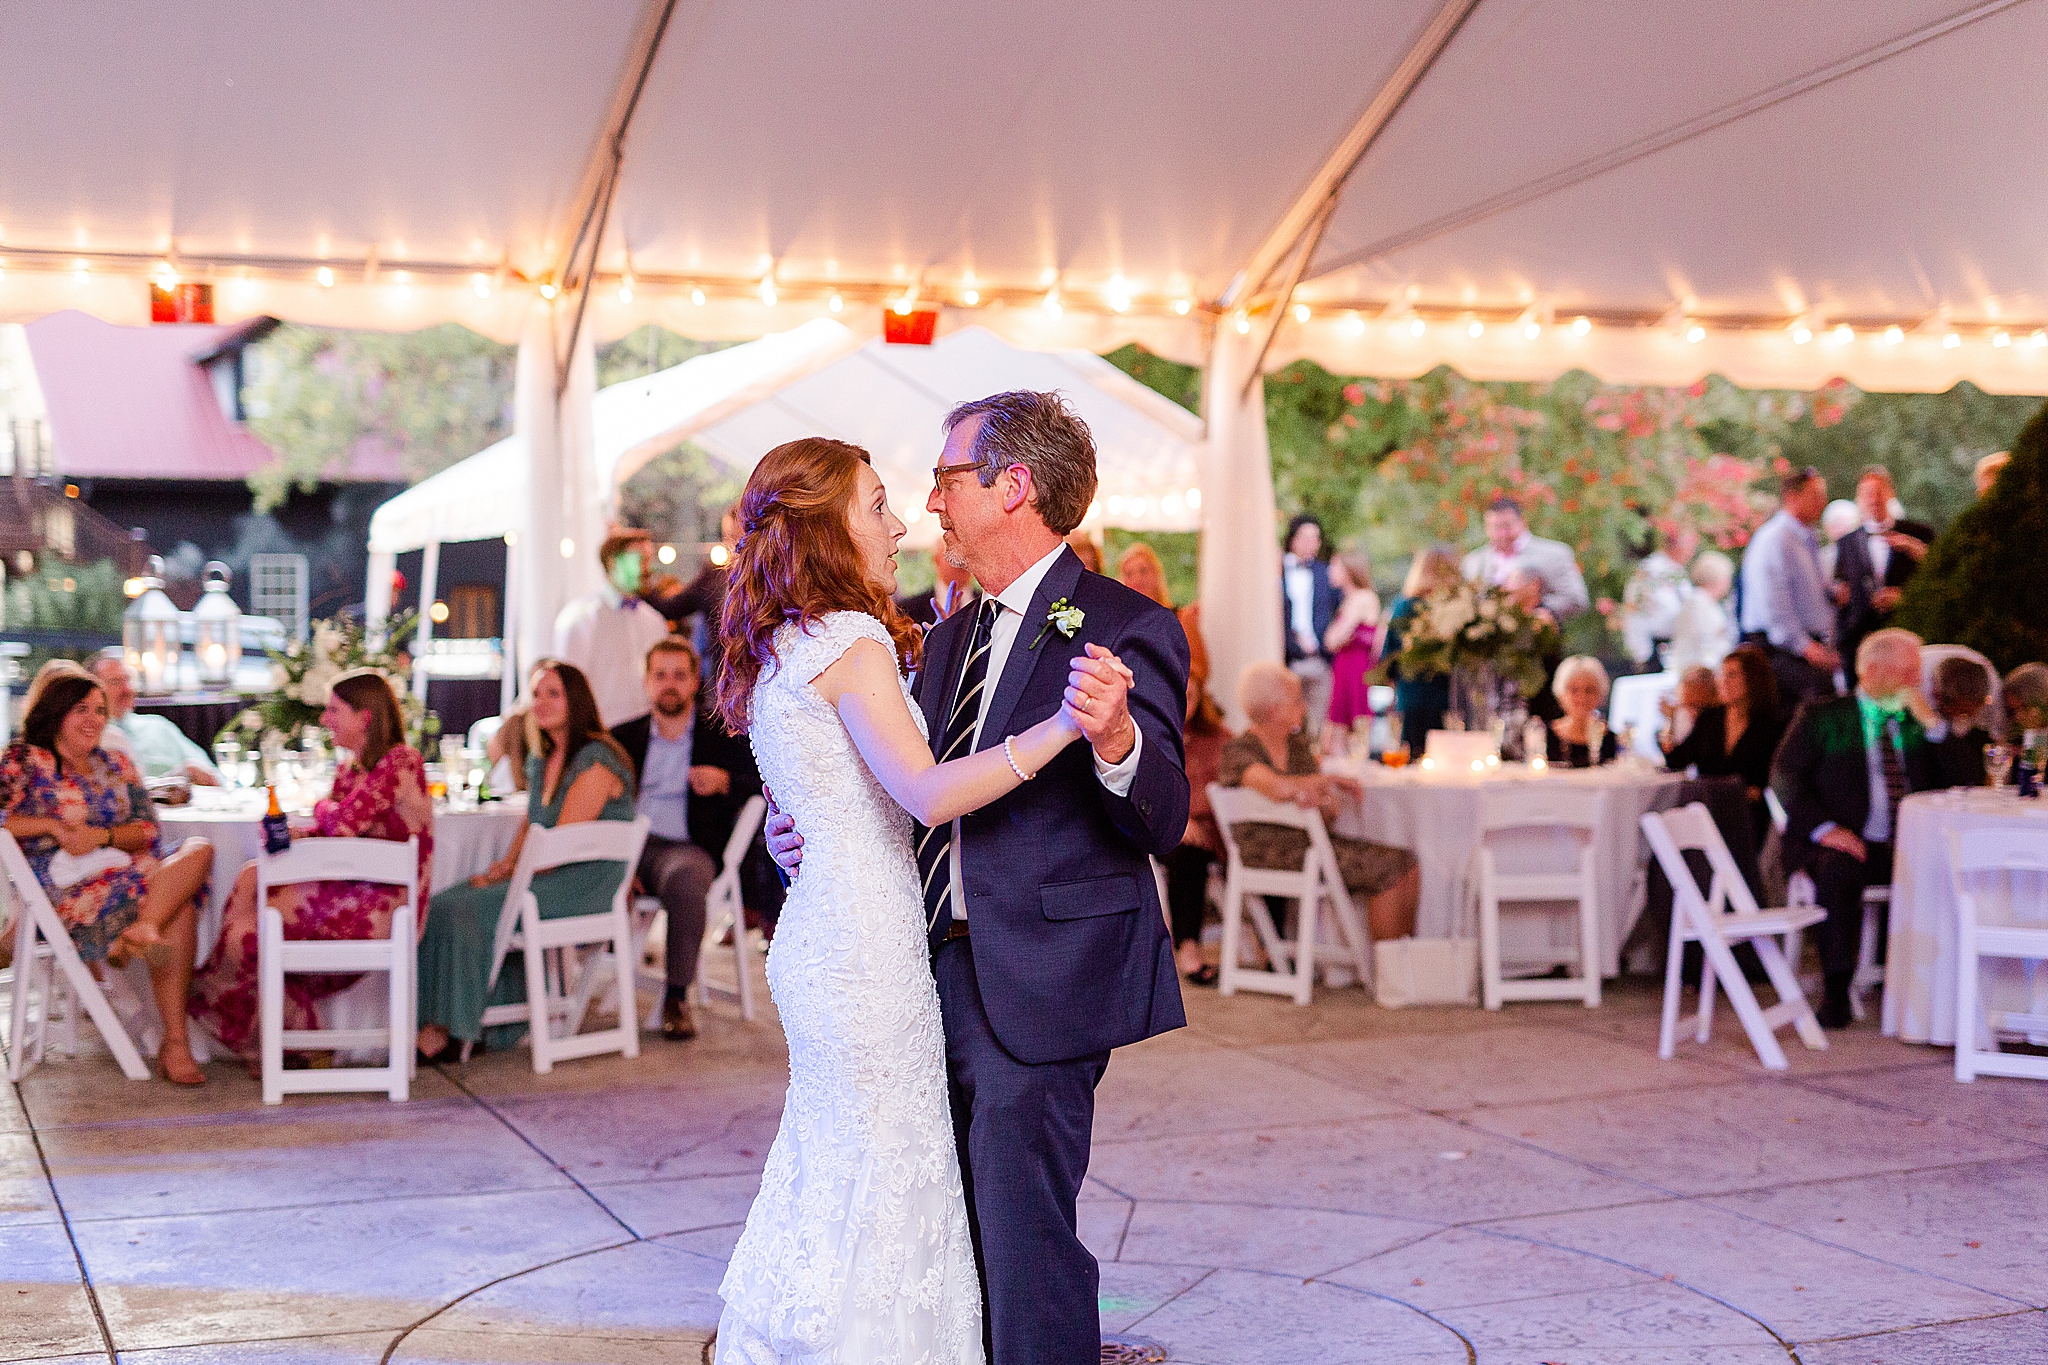 father-daughter dance under tent at Lake O' The Woods Plantation wedding reception